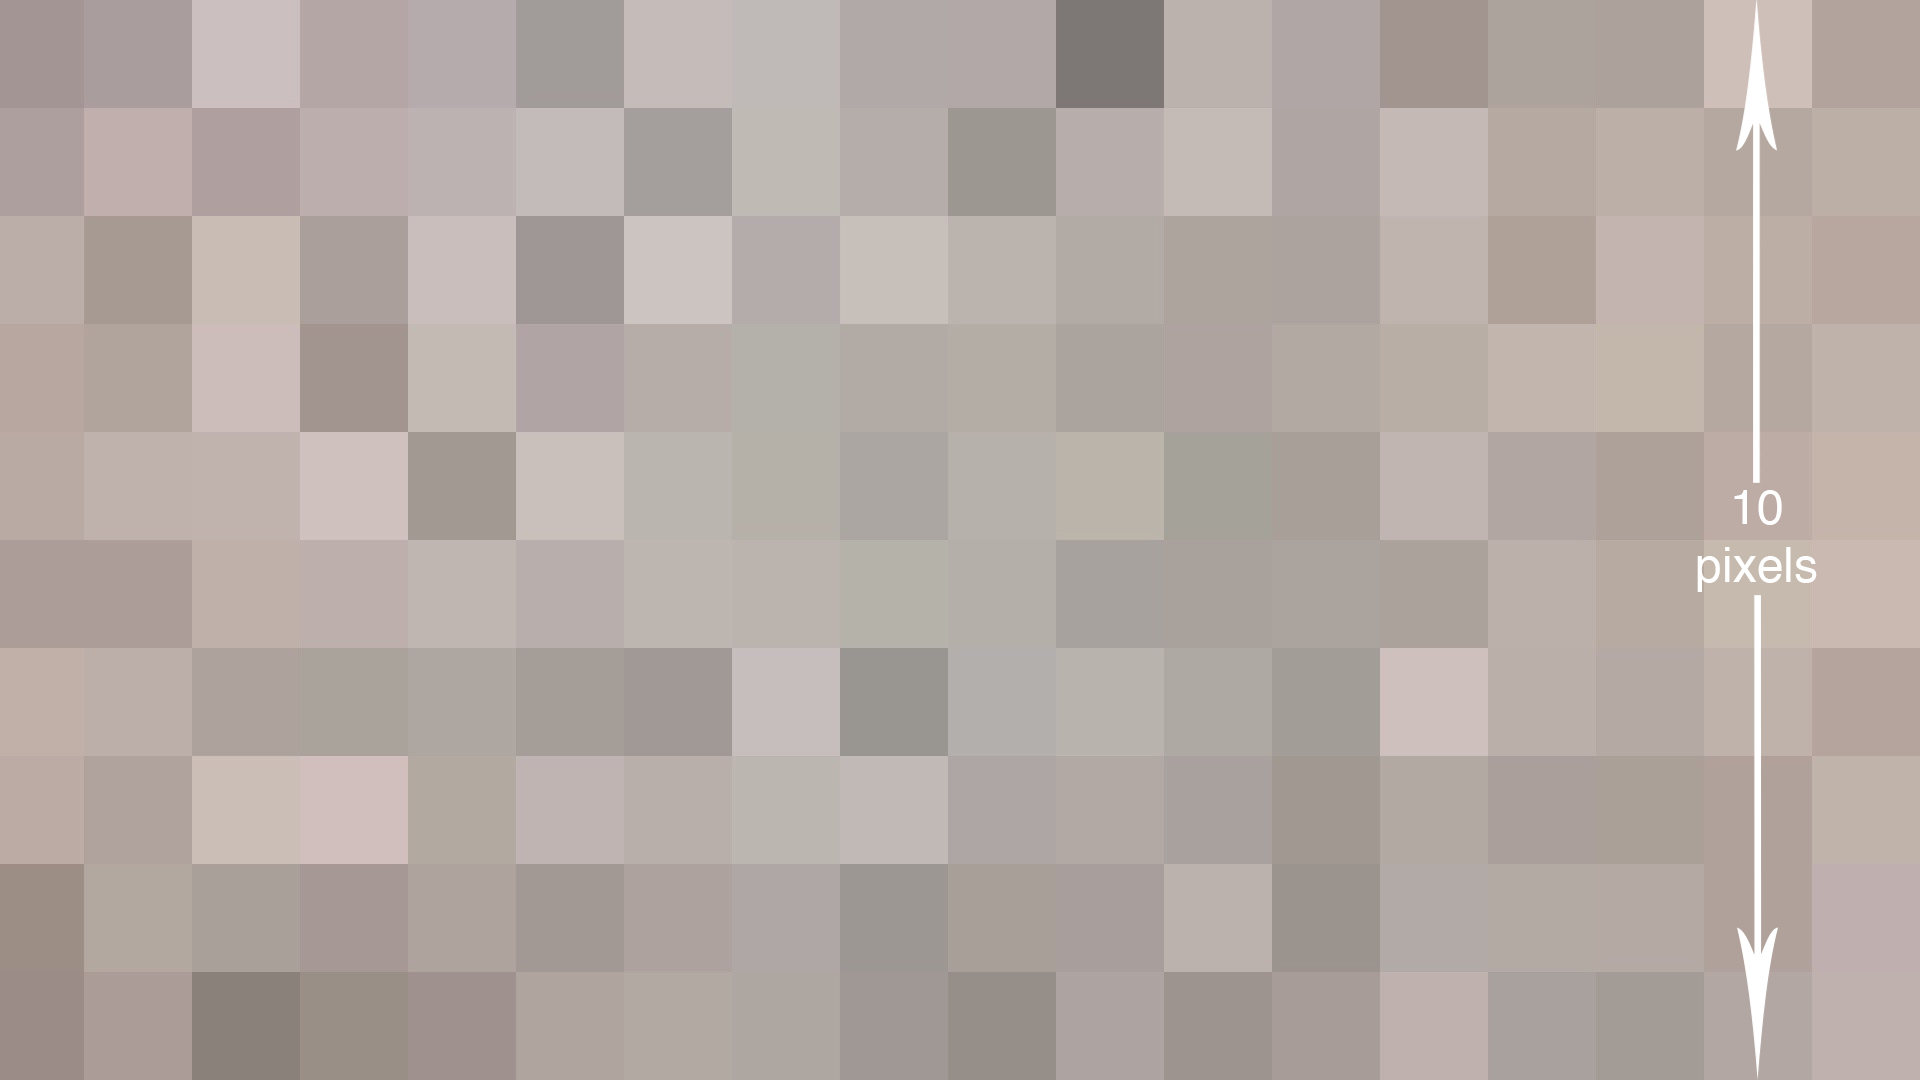 example of pixel size